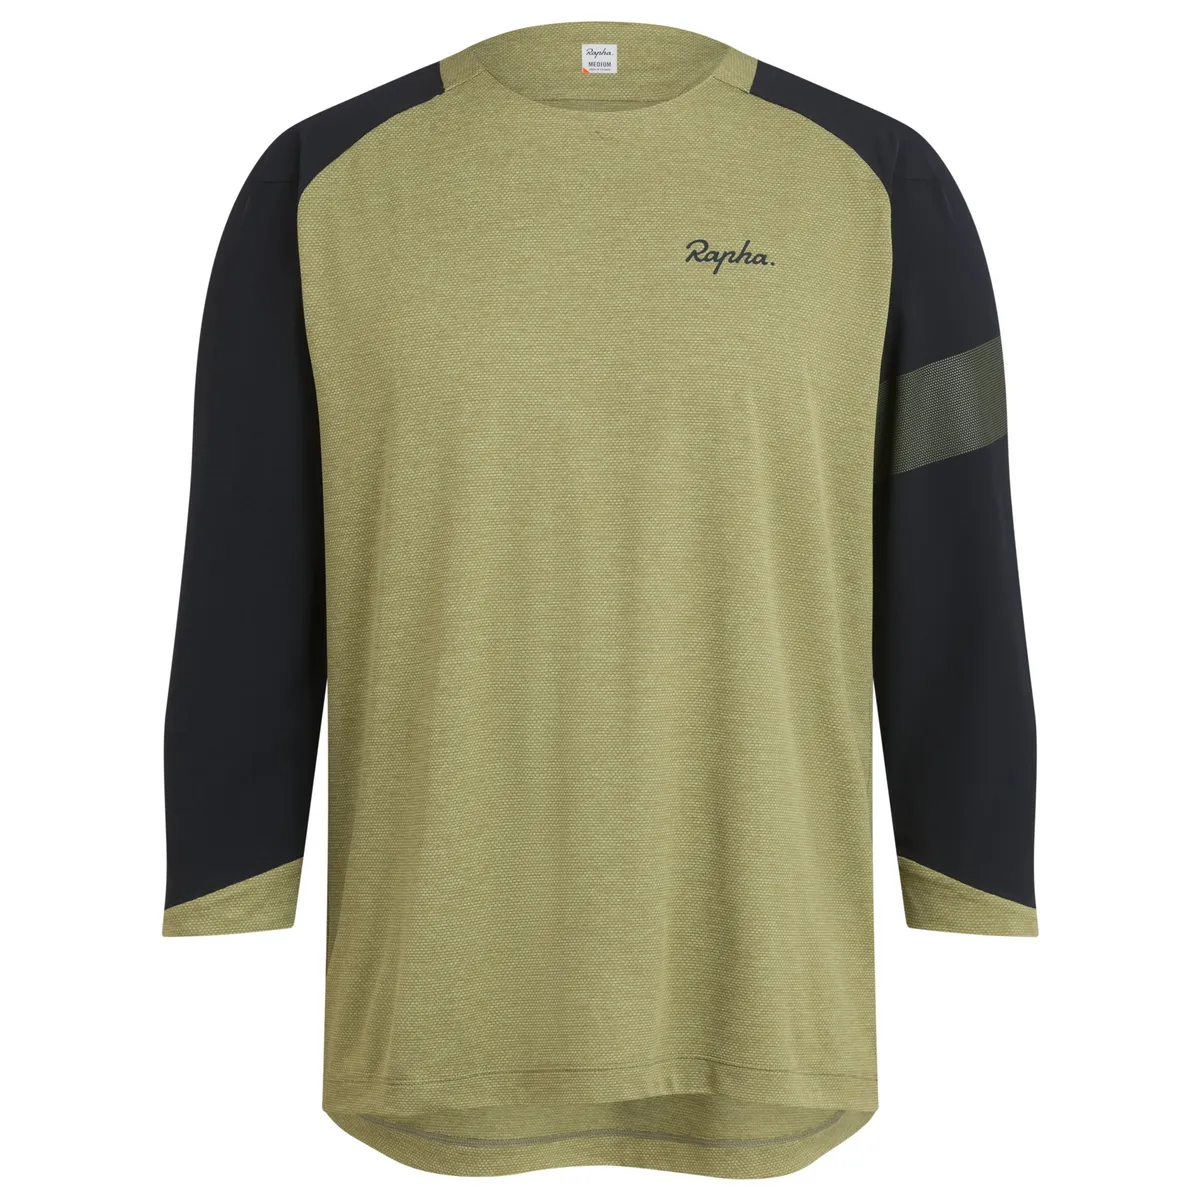 Rapha Trail ¾ Sleeve Jersey in Mayfly and Anthracite